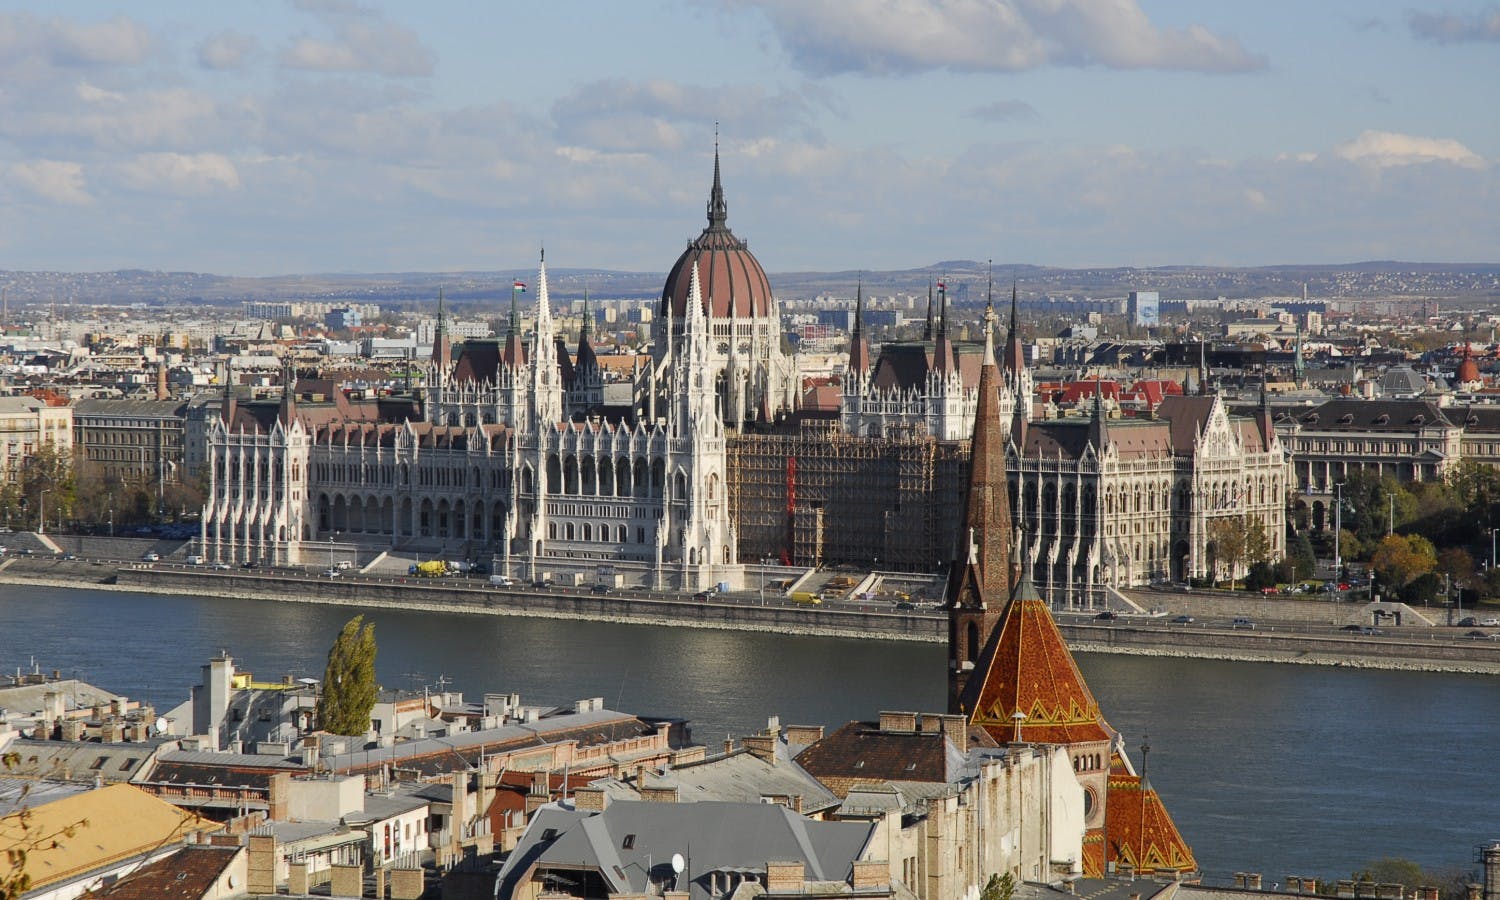 Hungarian Parliament: Guided Visit and Grand Tour of Budapest